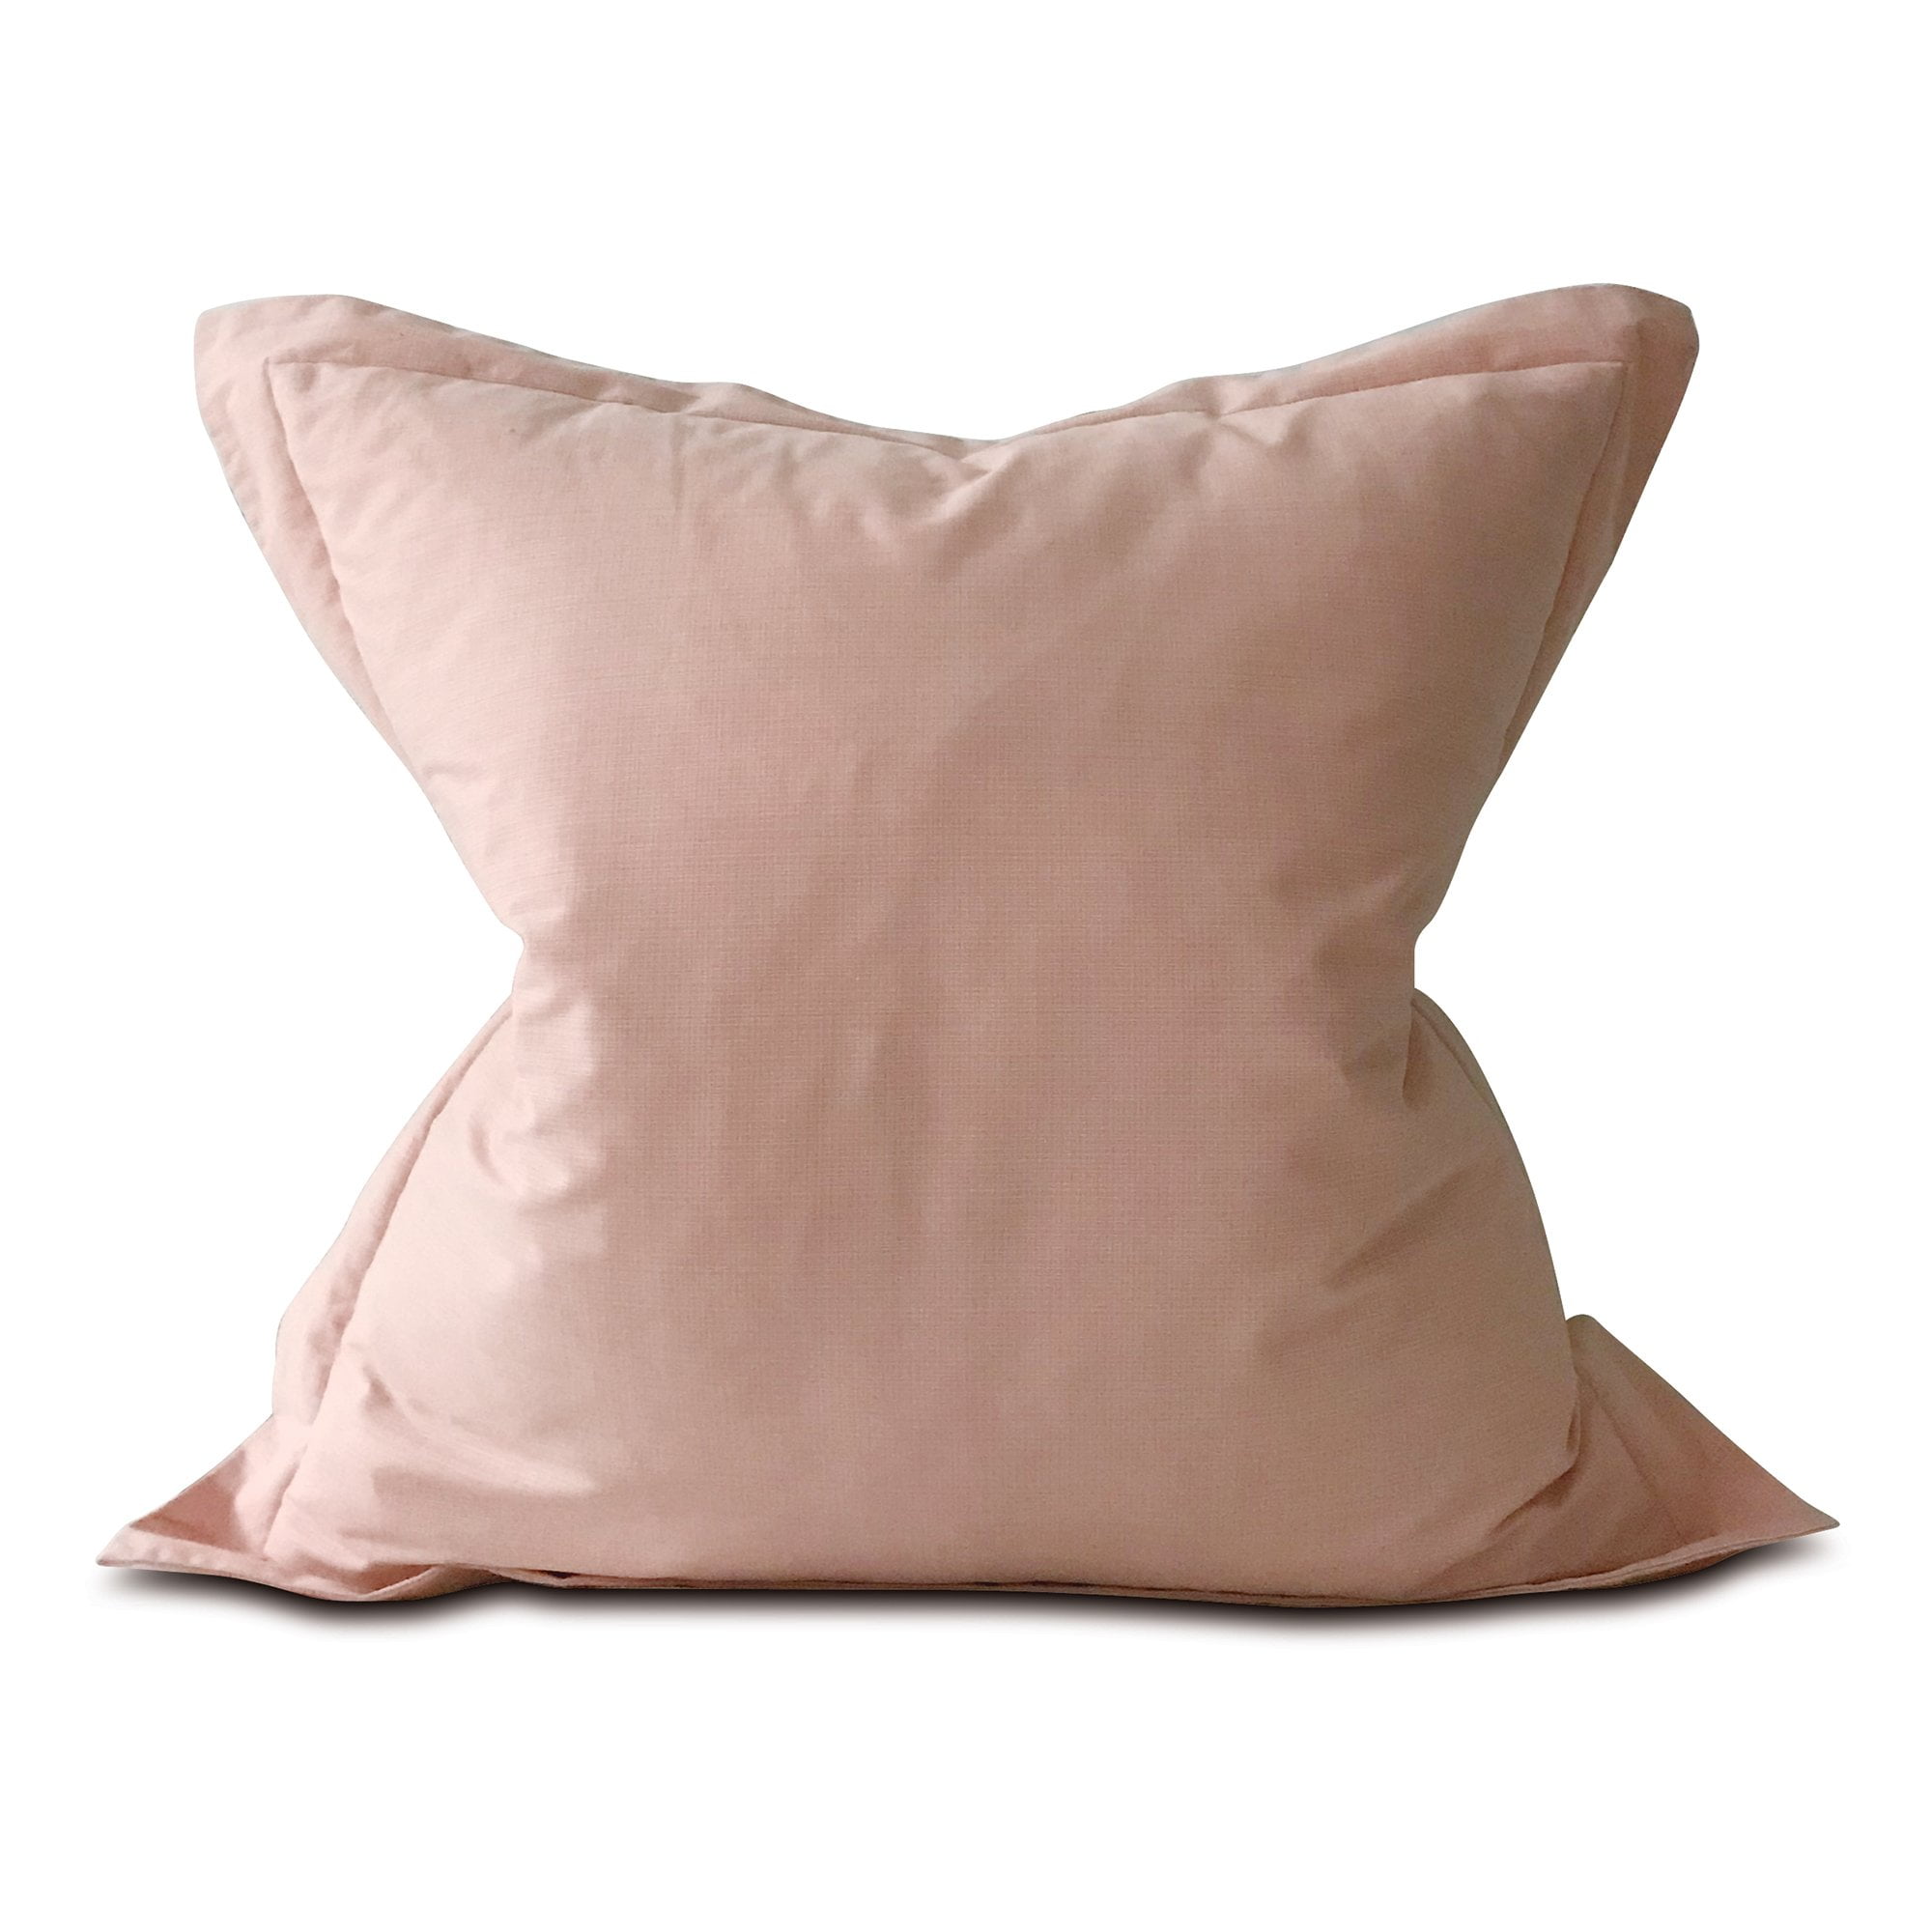 TWO Kenneth Cole STD Pillow EURO Shams BLUSH  ESCAPE 100% COTTON FULLY QUILTED 